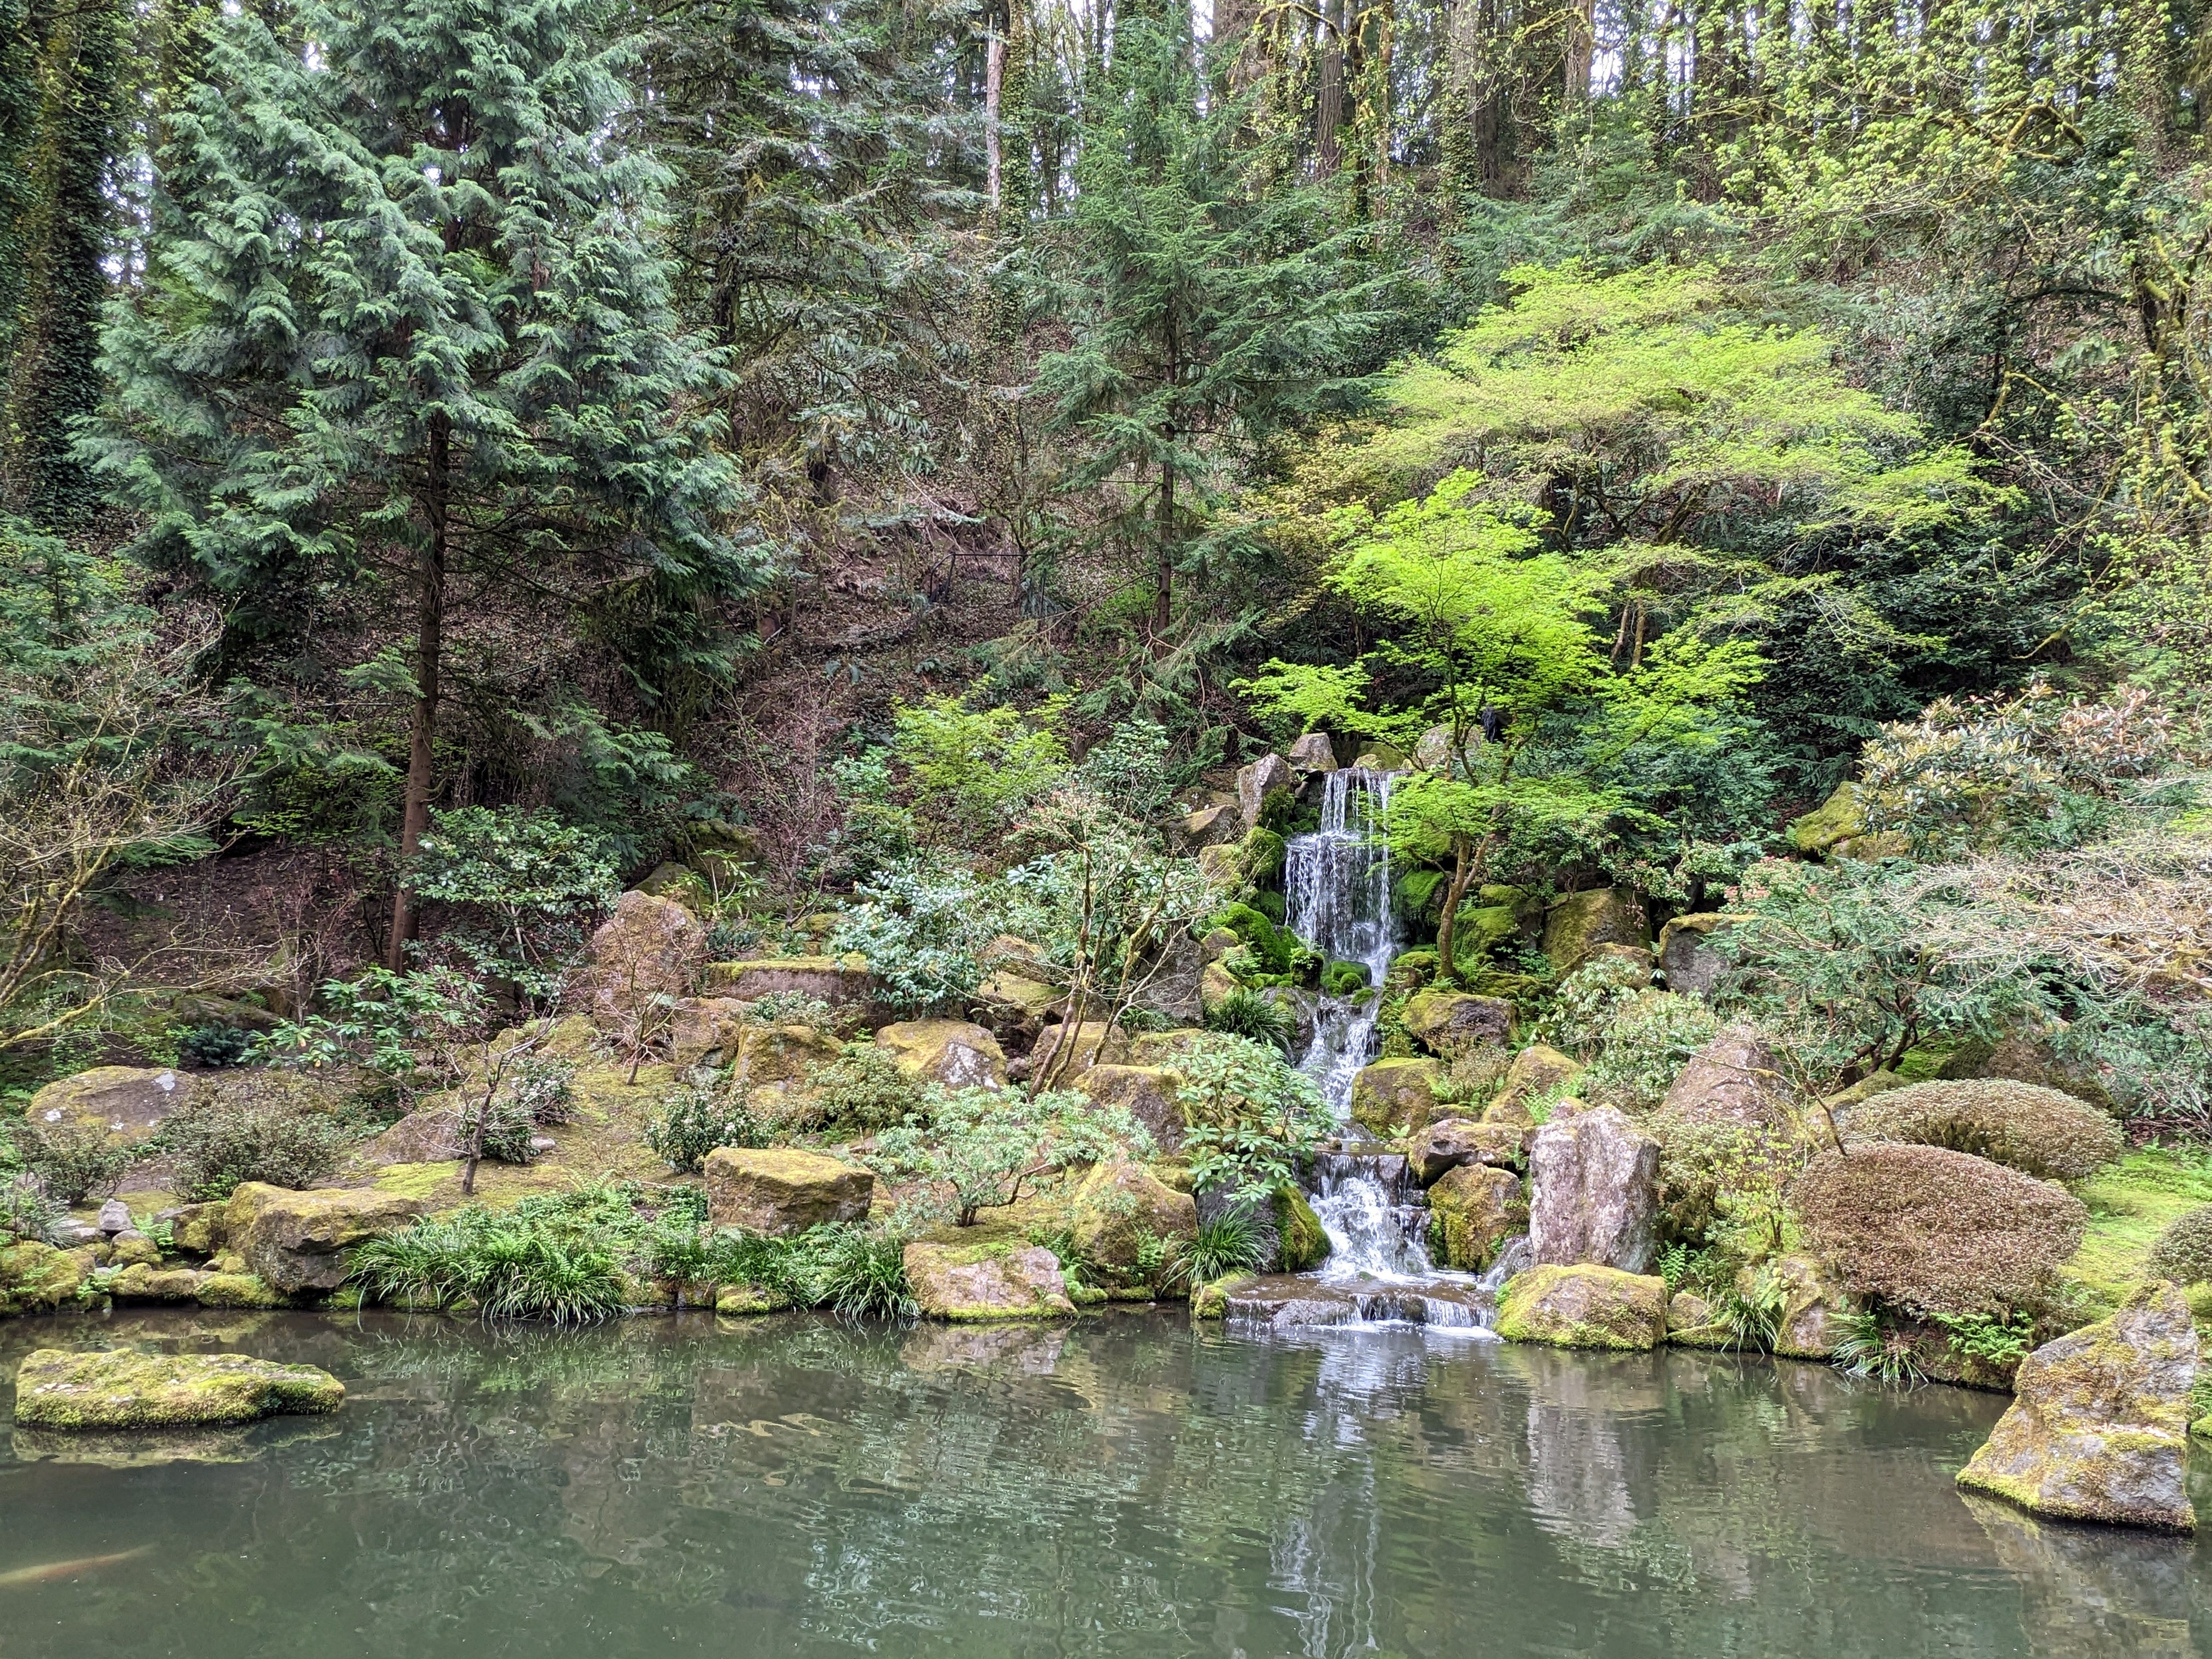 a pond nestled next to a hill covered in evergreen trees, with a small waterfall flowing into the pond